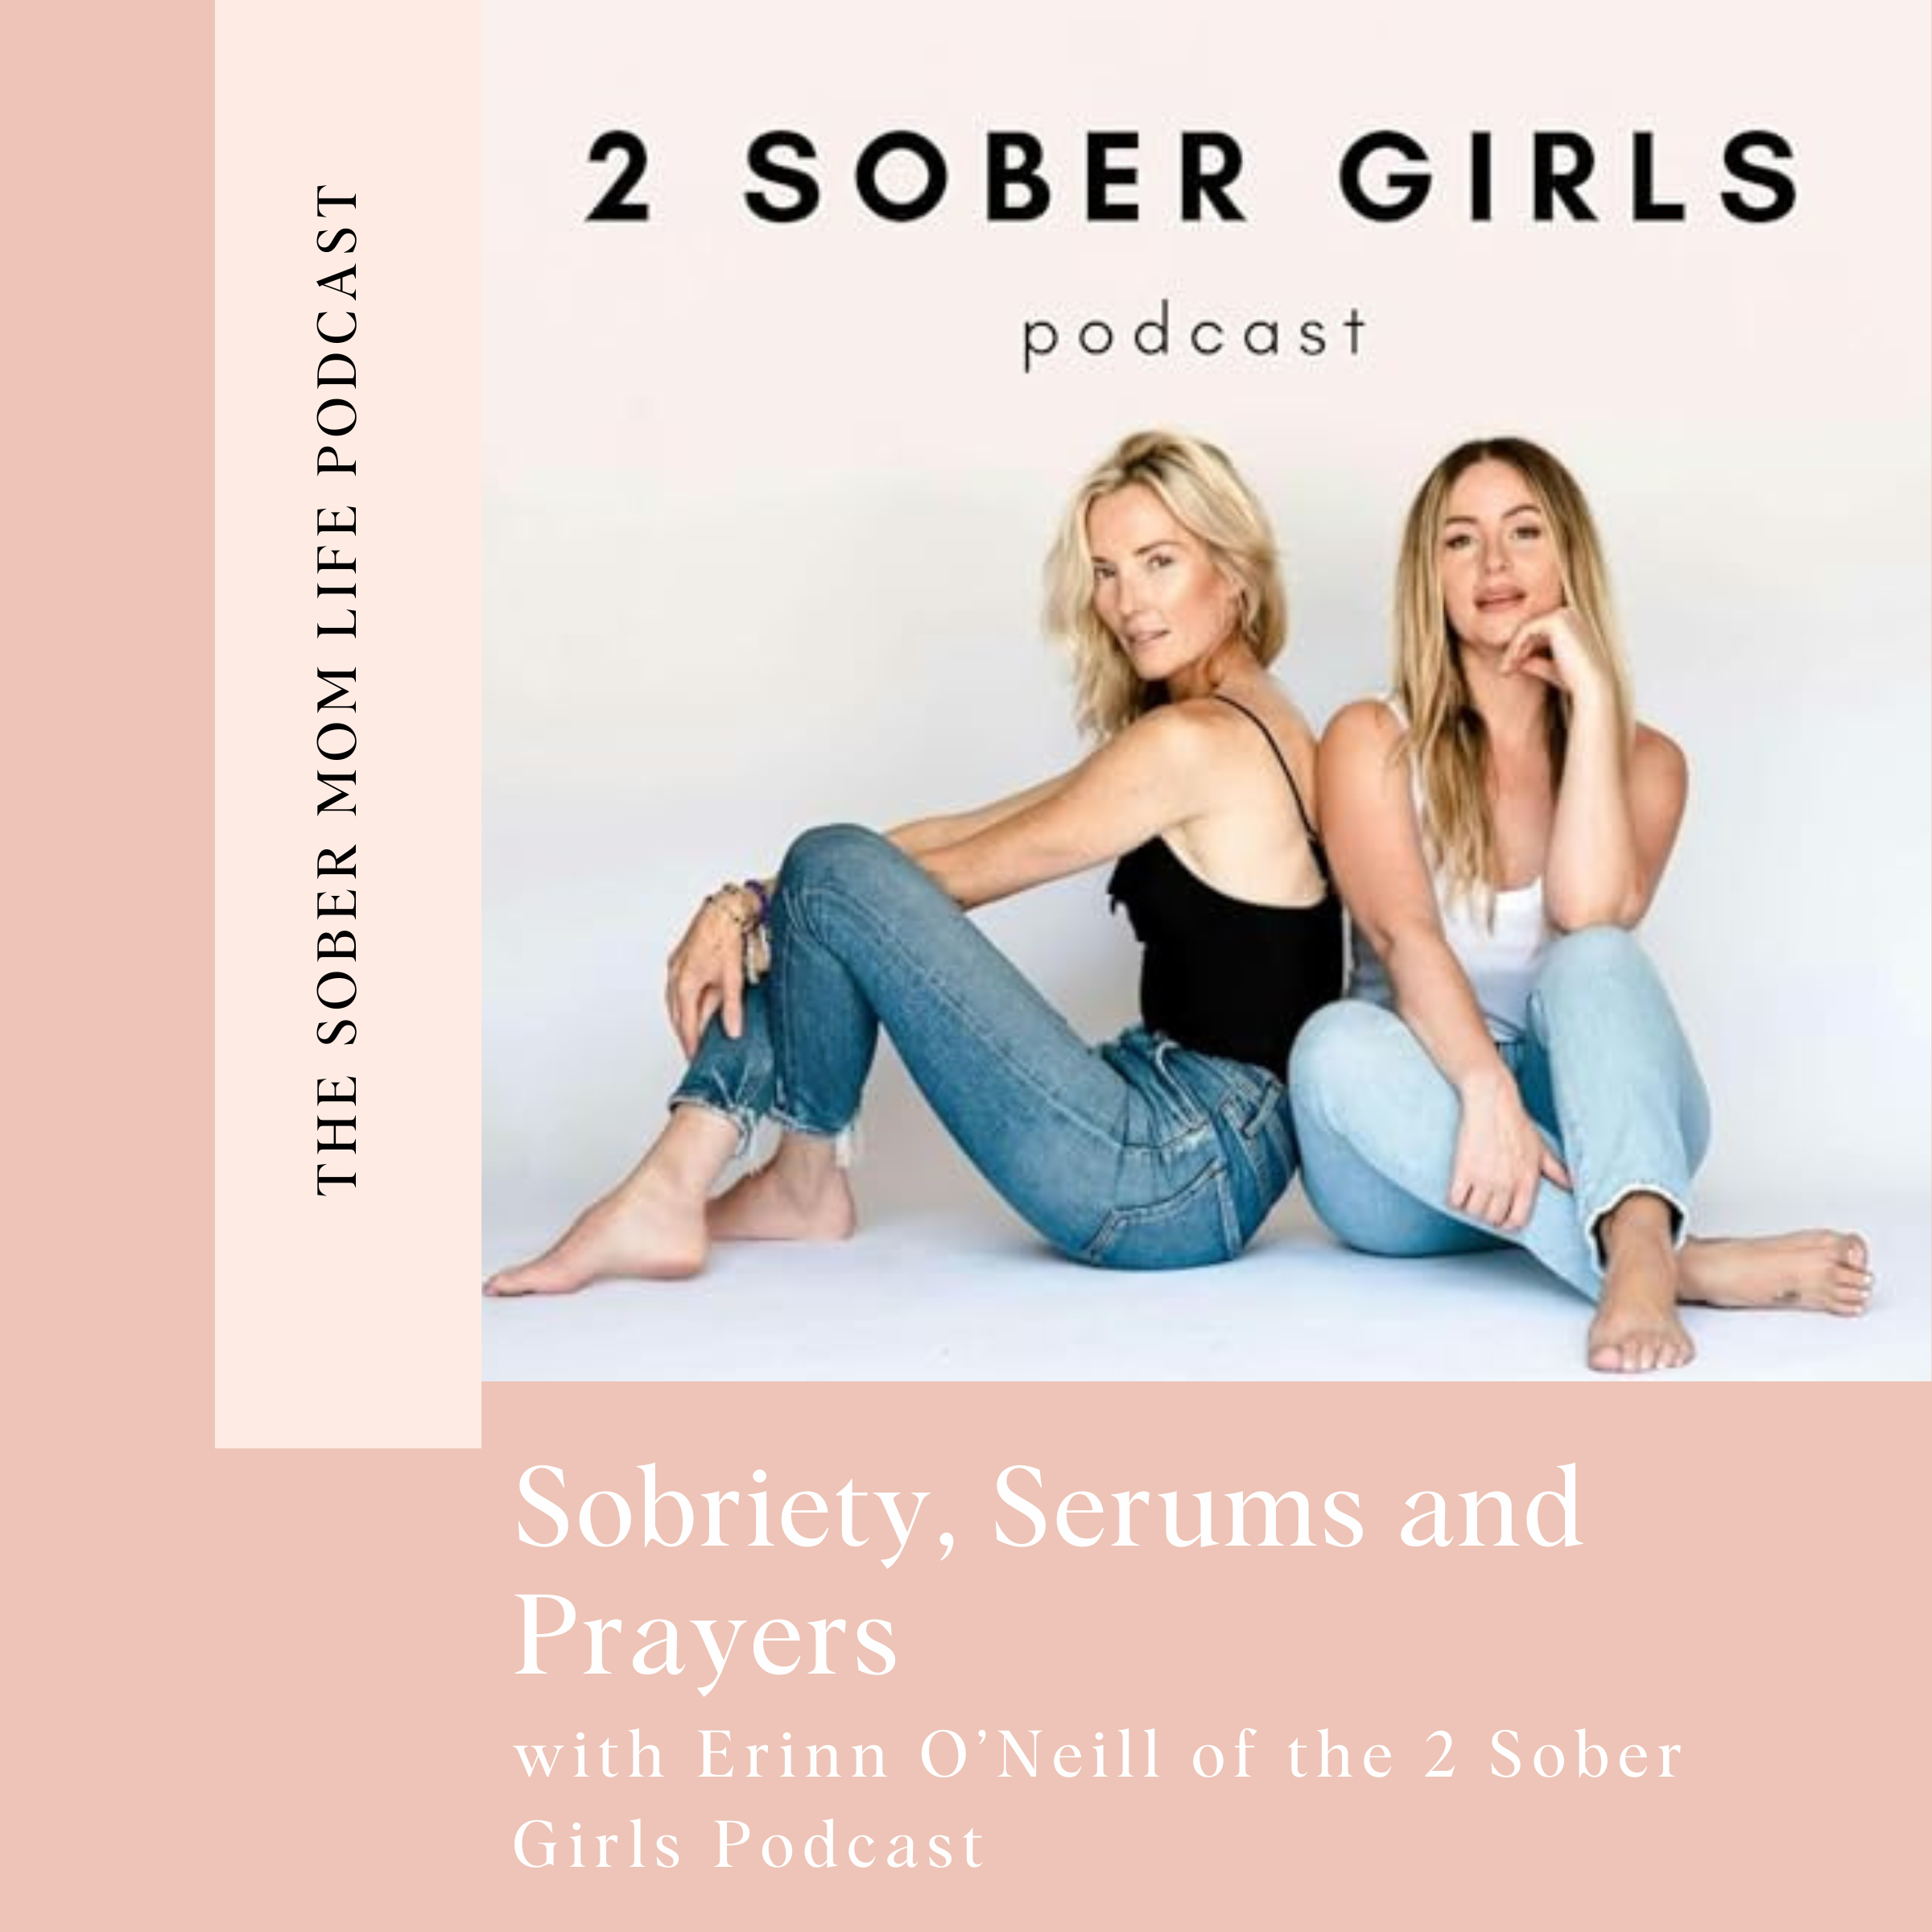 Sobriety, Serums and Prayers with Erinn O’Neill of the 2 Sober Girls Podcast